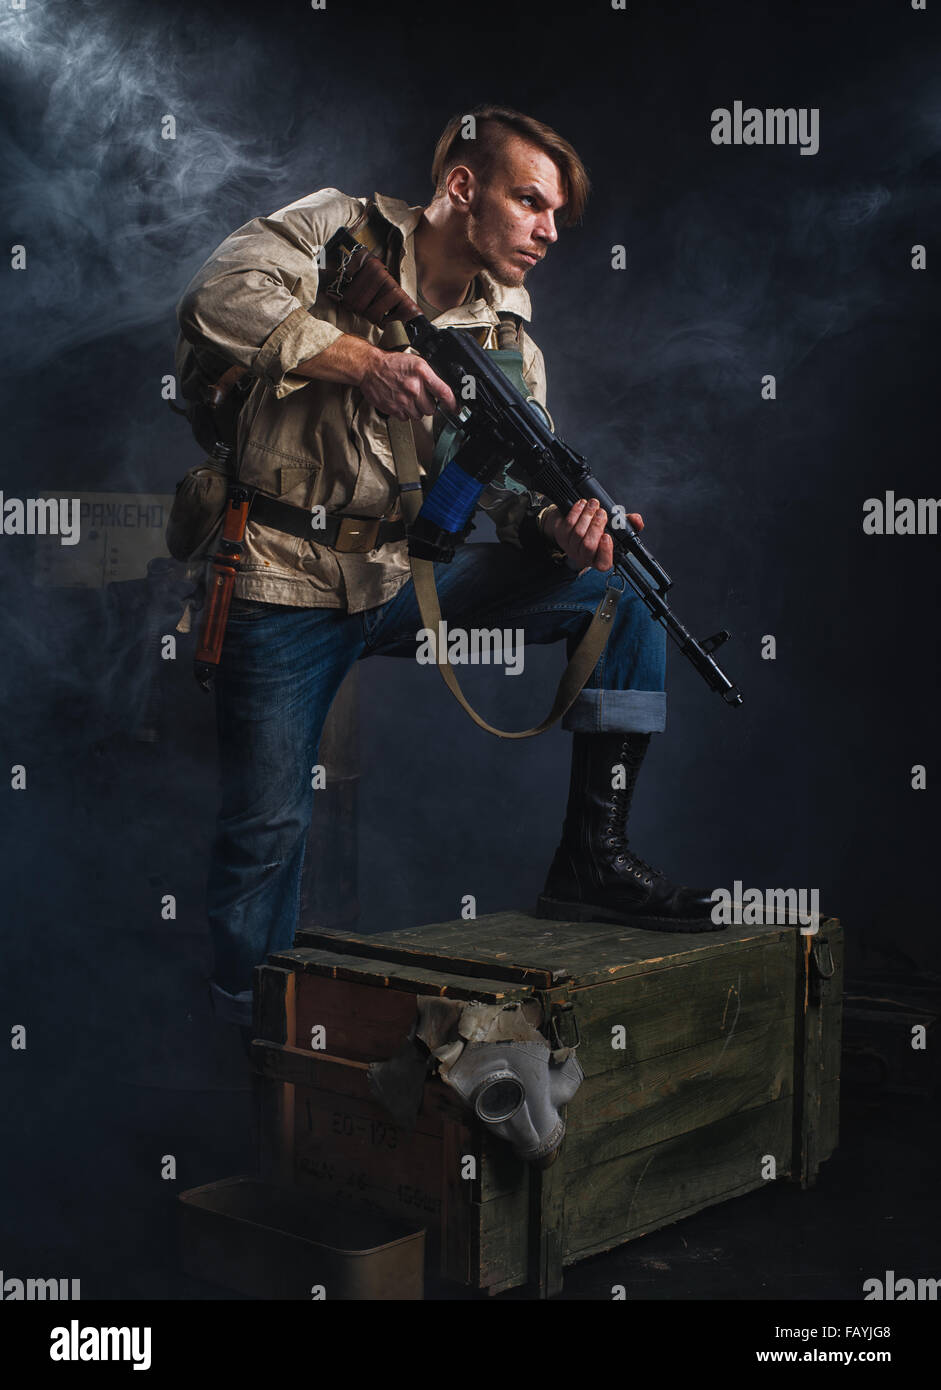 Armed man with a gun. Post-apocalyptic fiction. Stalker. Stock Photo